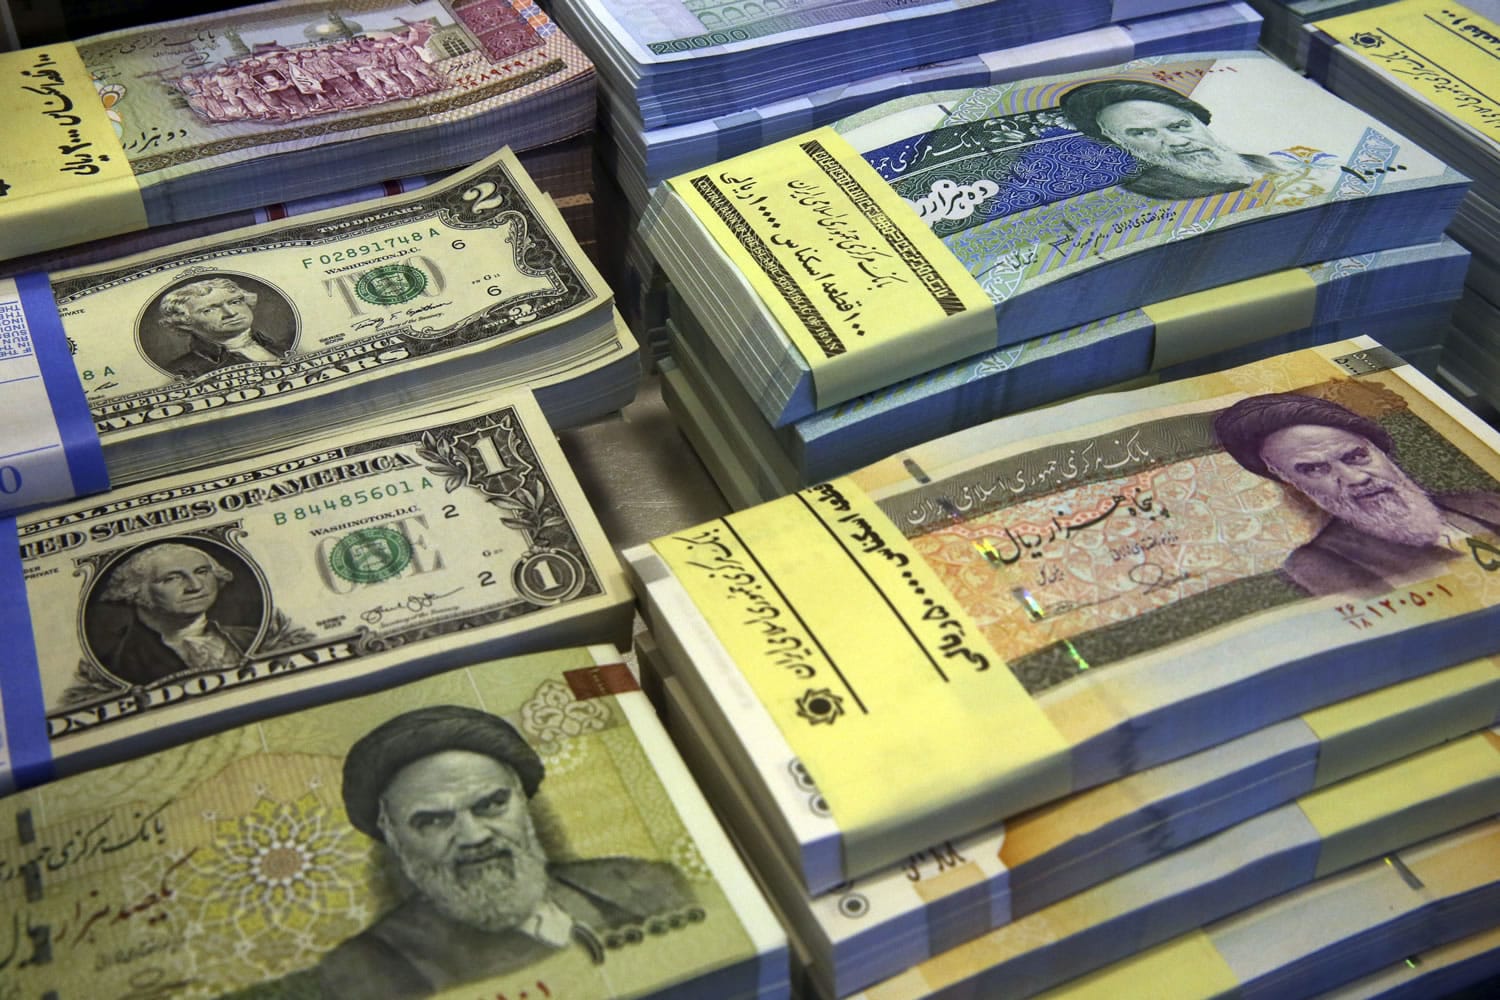 Iranian and U.S. banknotes are on display at a currency exchange shop in downtown Tehran, Iran. Iran said Tuesday that it successfully transferred some of the billions of dollars&#039; worth of frozen overseas assets following the implementation of the nuclear deal with world powers. But ordinary Iranians are still waiting to see how their daily lives will improve and how fast Iranian companies will gain access to financial markets worldwide.